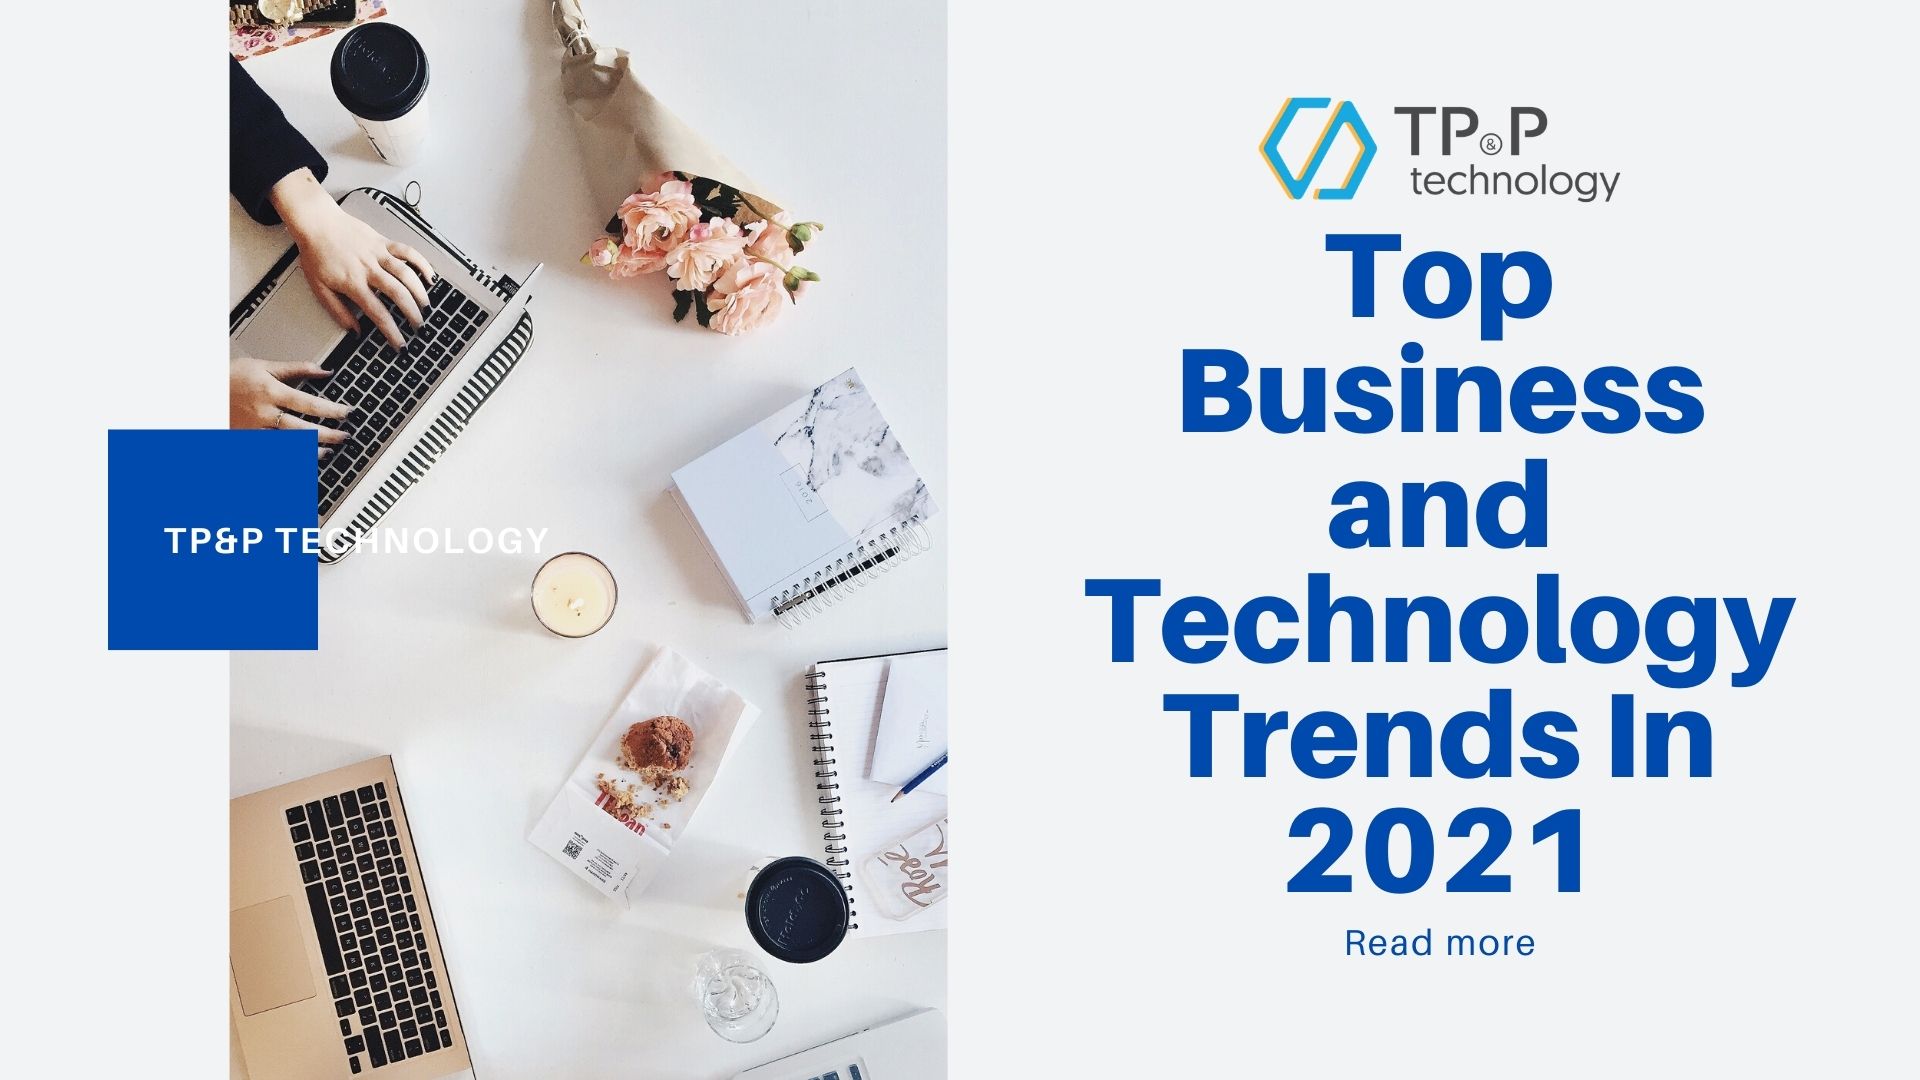 Top Business and Technology Trends In 2021